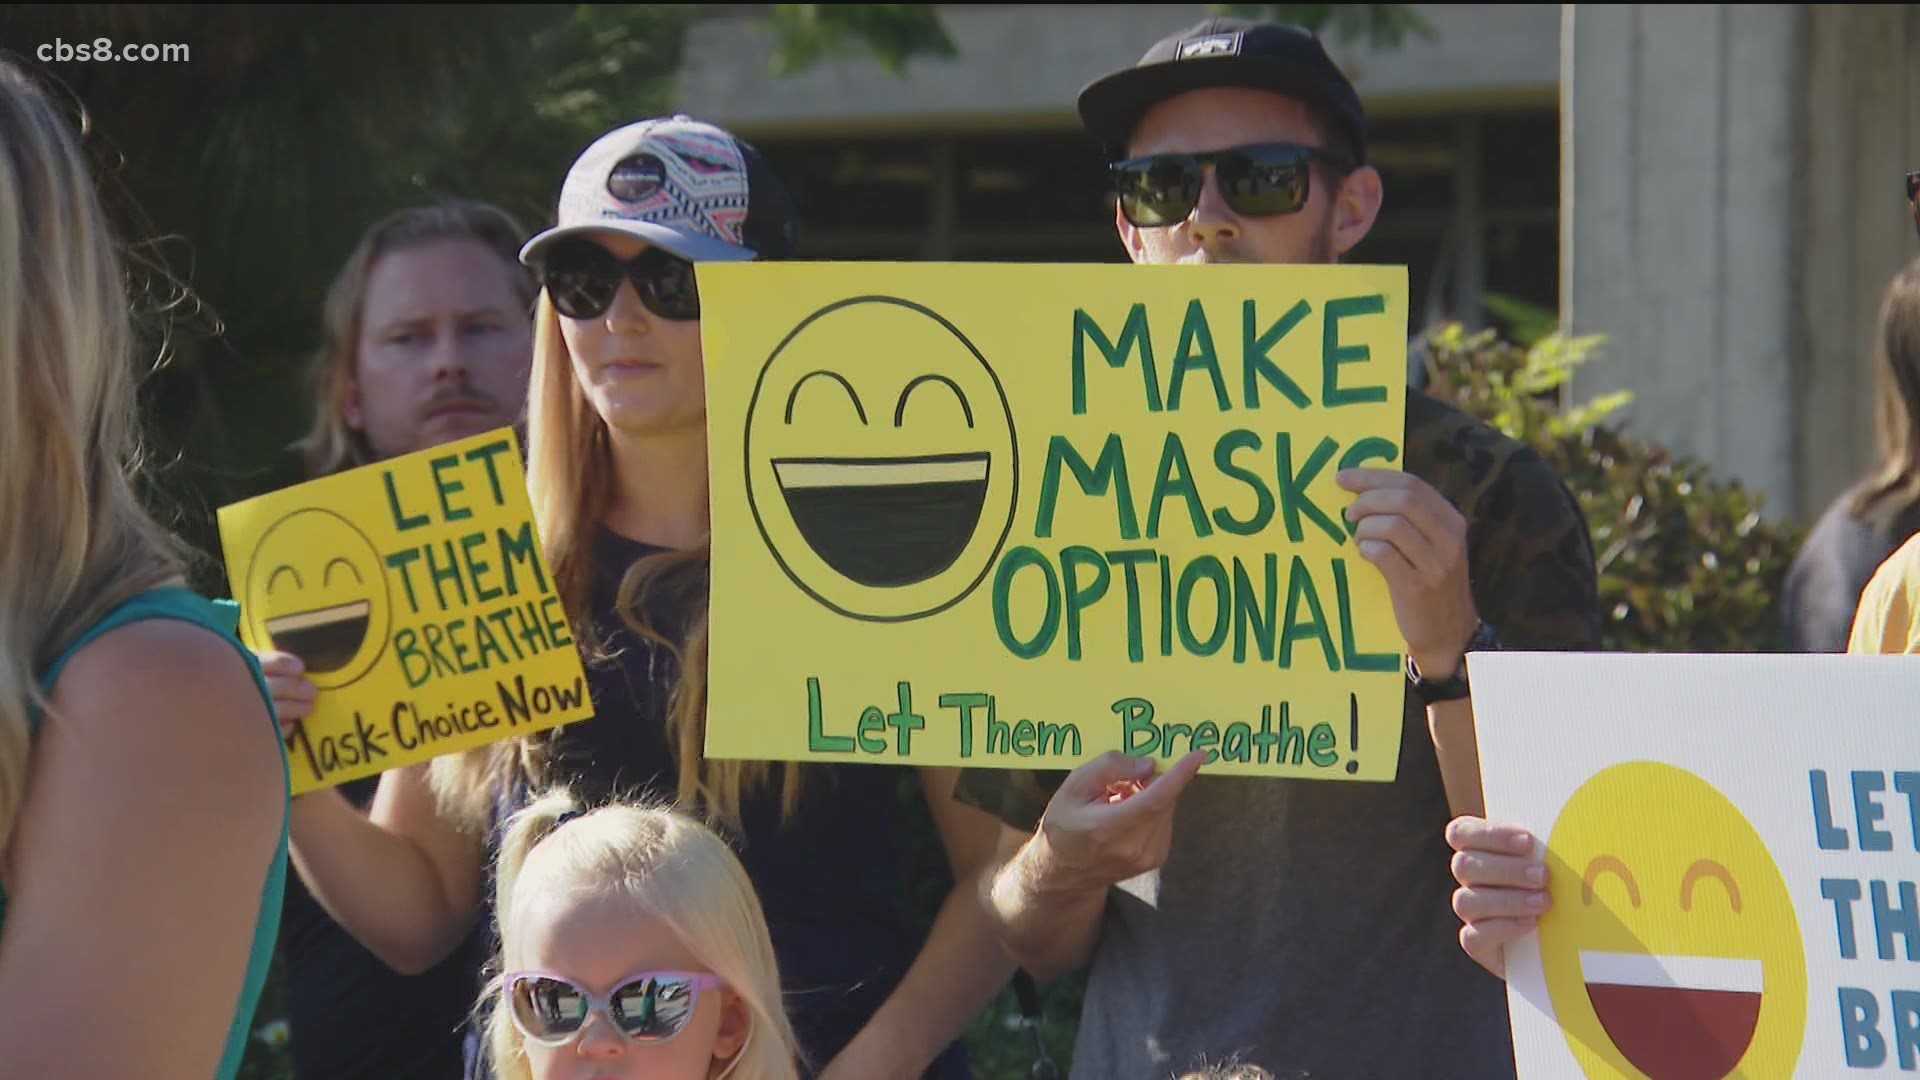 A demonstration was held outside the SDUSD board meeting with parents, teachers, and students waving signs calling for masks to be optional in classrooms.